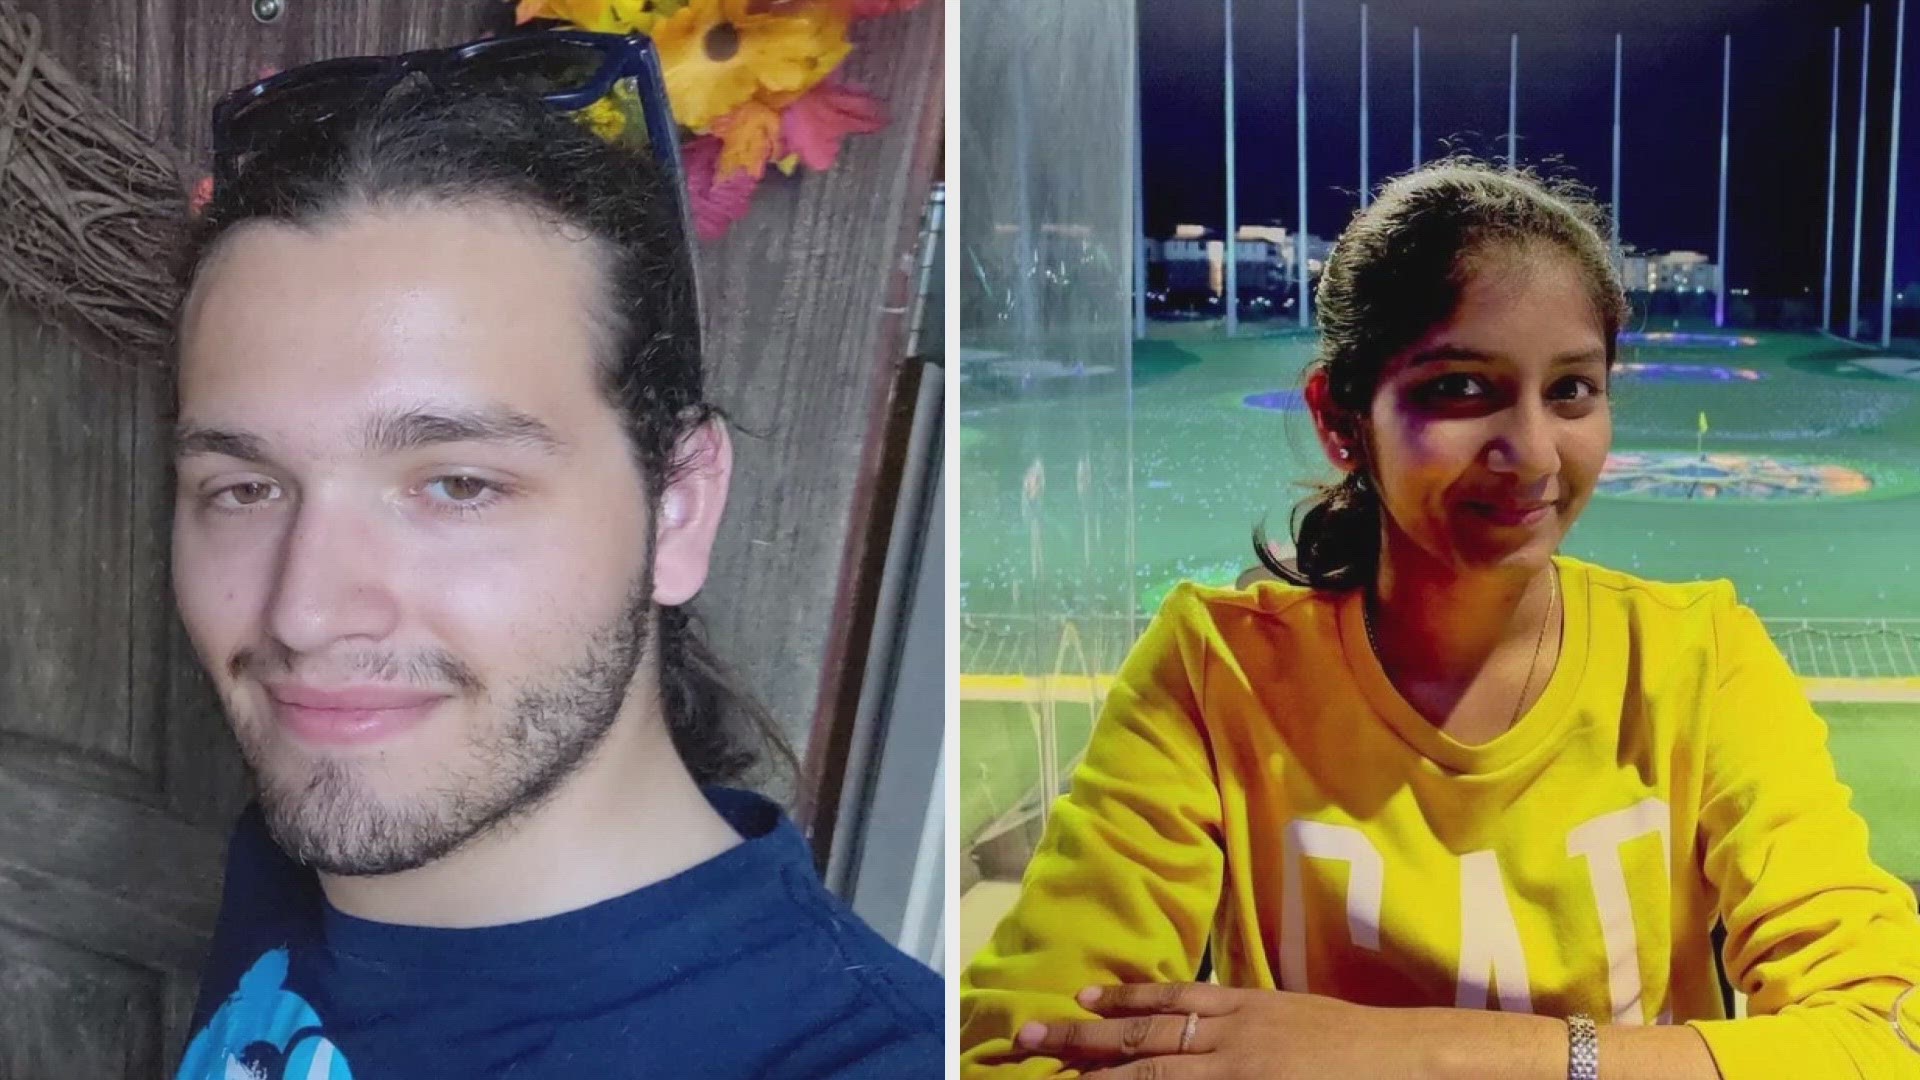 Christian LaCour and Aishwarya Thatikonda were among those killed when a gunman opened fire at the Allen Premium Outlets mall in Allen, Texas.